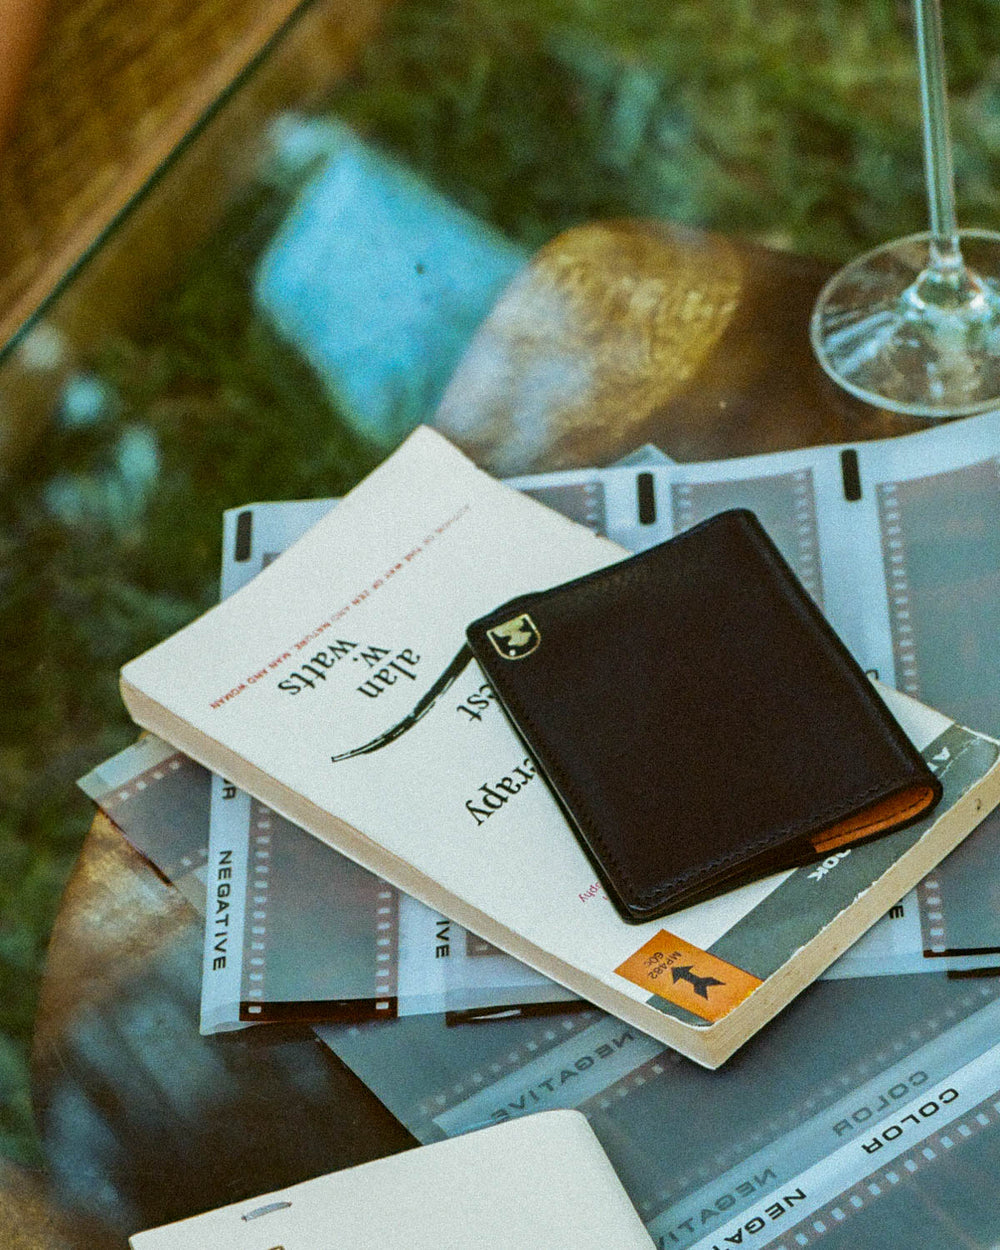 A glass of wine, The Departure Bifold Wallet - Onyx from Dandy Del Mar, and a book on a table.